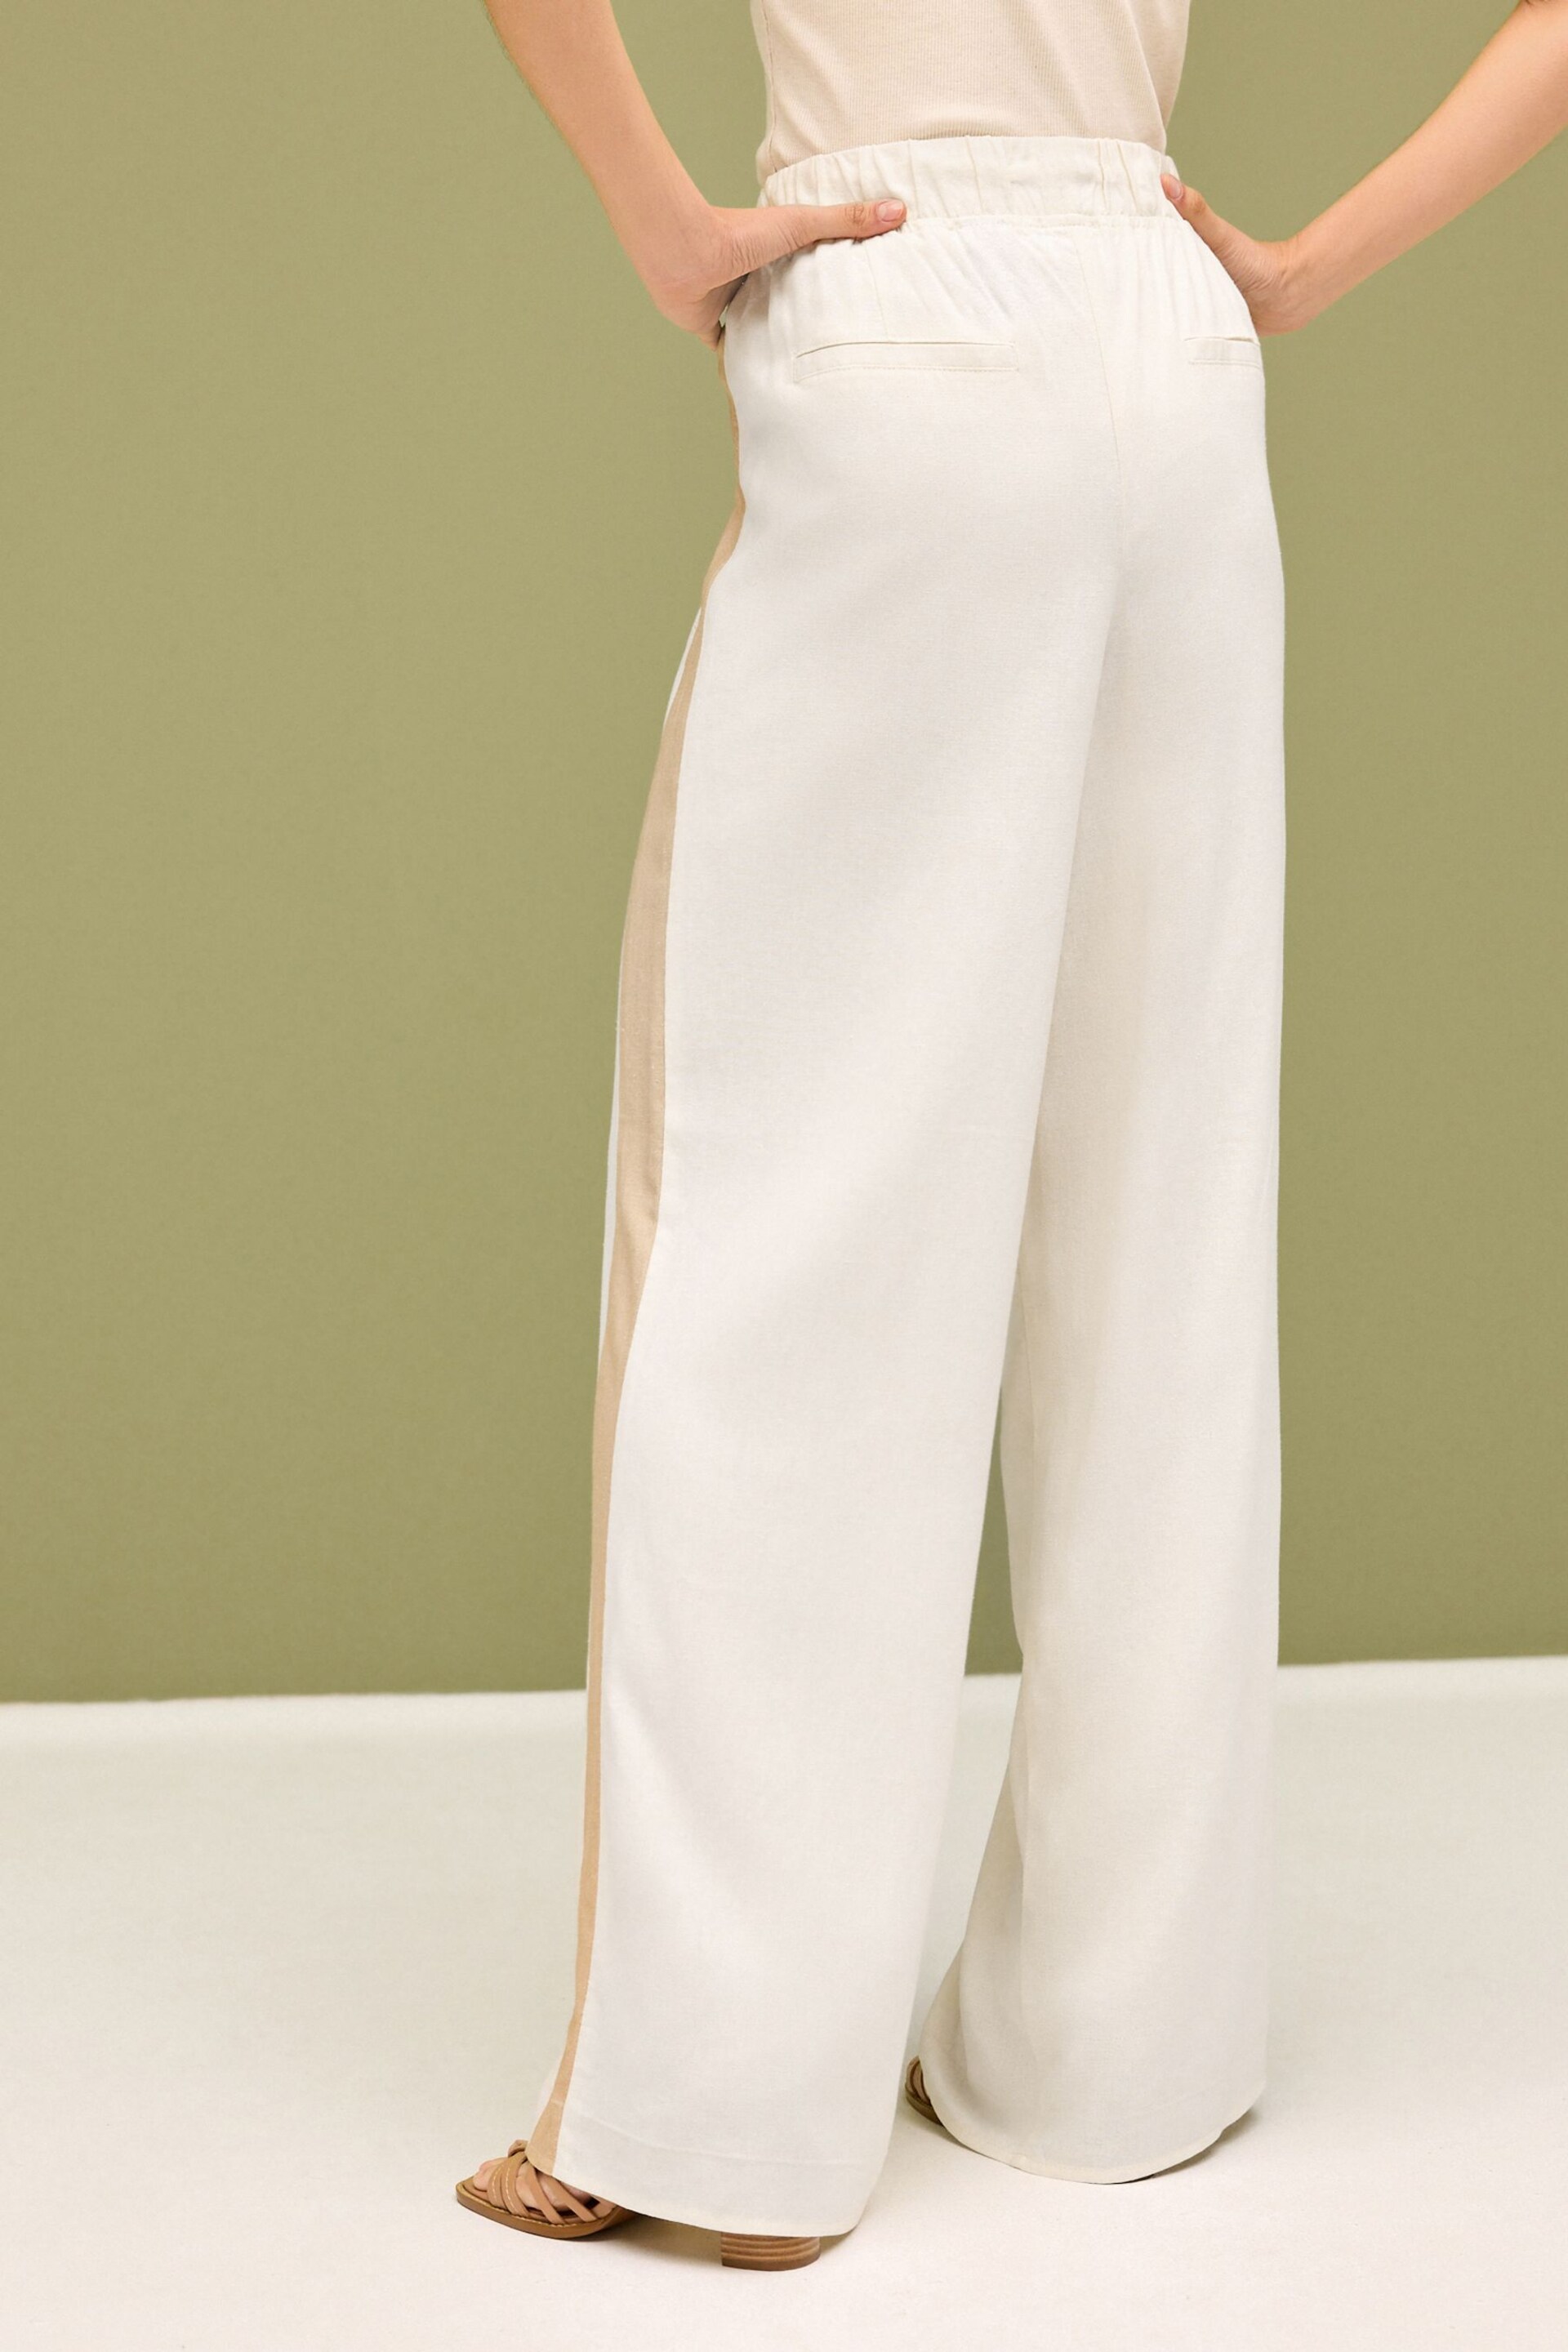 Neutral/Tan Linen Blend Side Stripe Track Trousers - Image 4 of 5